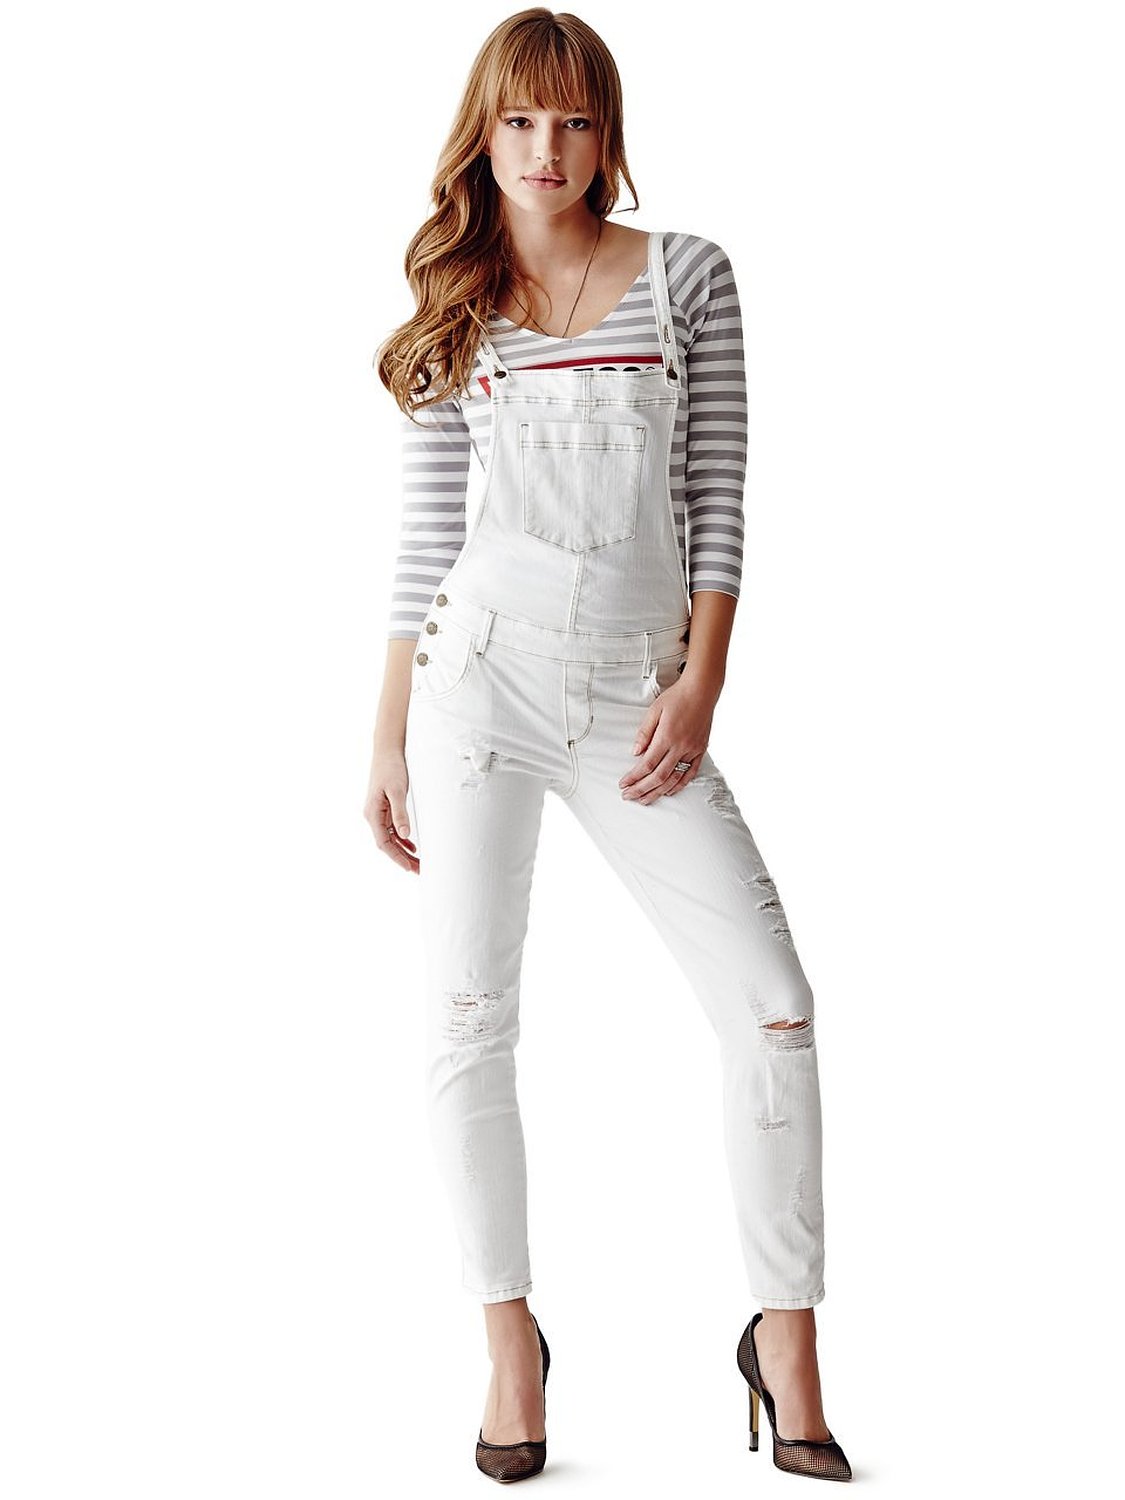 GUESS Women's Carlie Slim-Fit Overalls in True White Destroy Wash